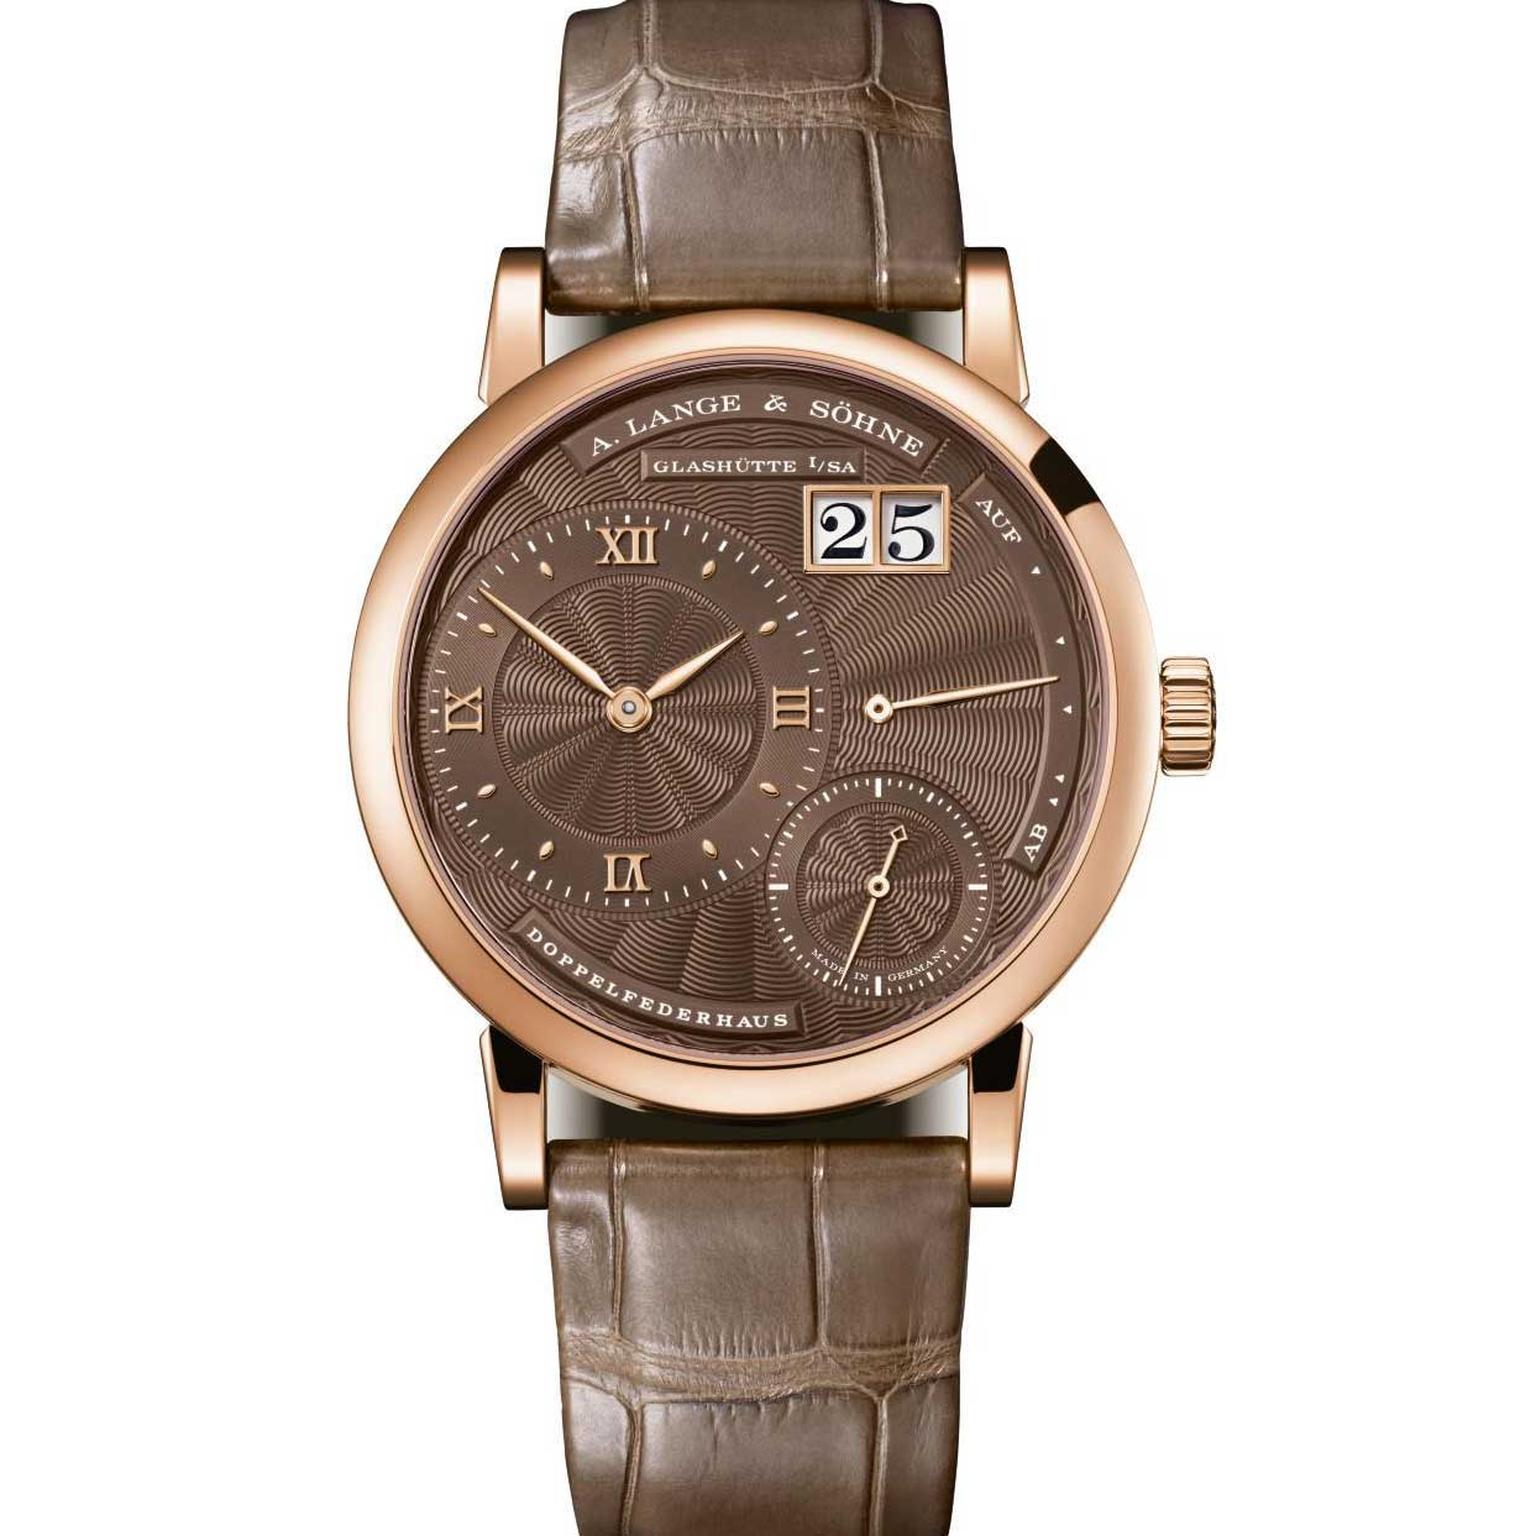 A. Lange Soehne ladies Little Lange 1 in rose gold with a hand wound movement.